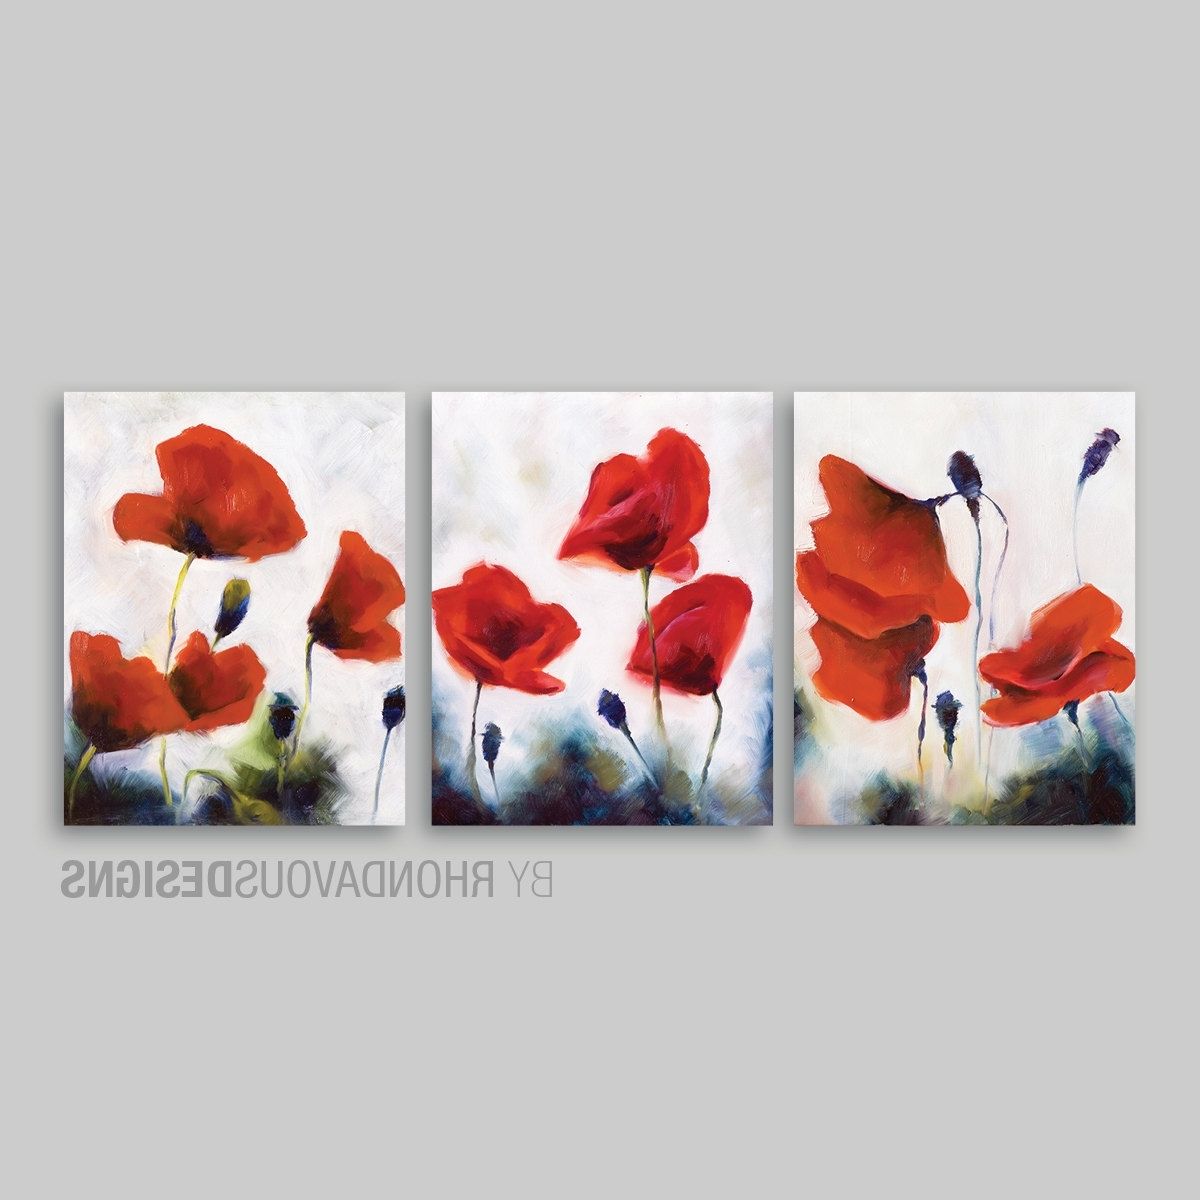 Red Bathroom Wall Art Intended For Current Bathroom Etsy Red Poppy Wall Art Sketches Furniture Pattern Images (View 5 of 15)